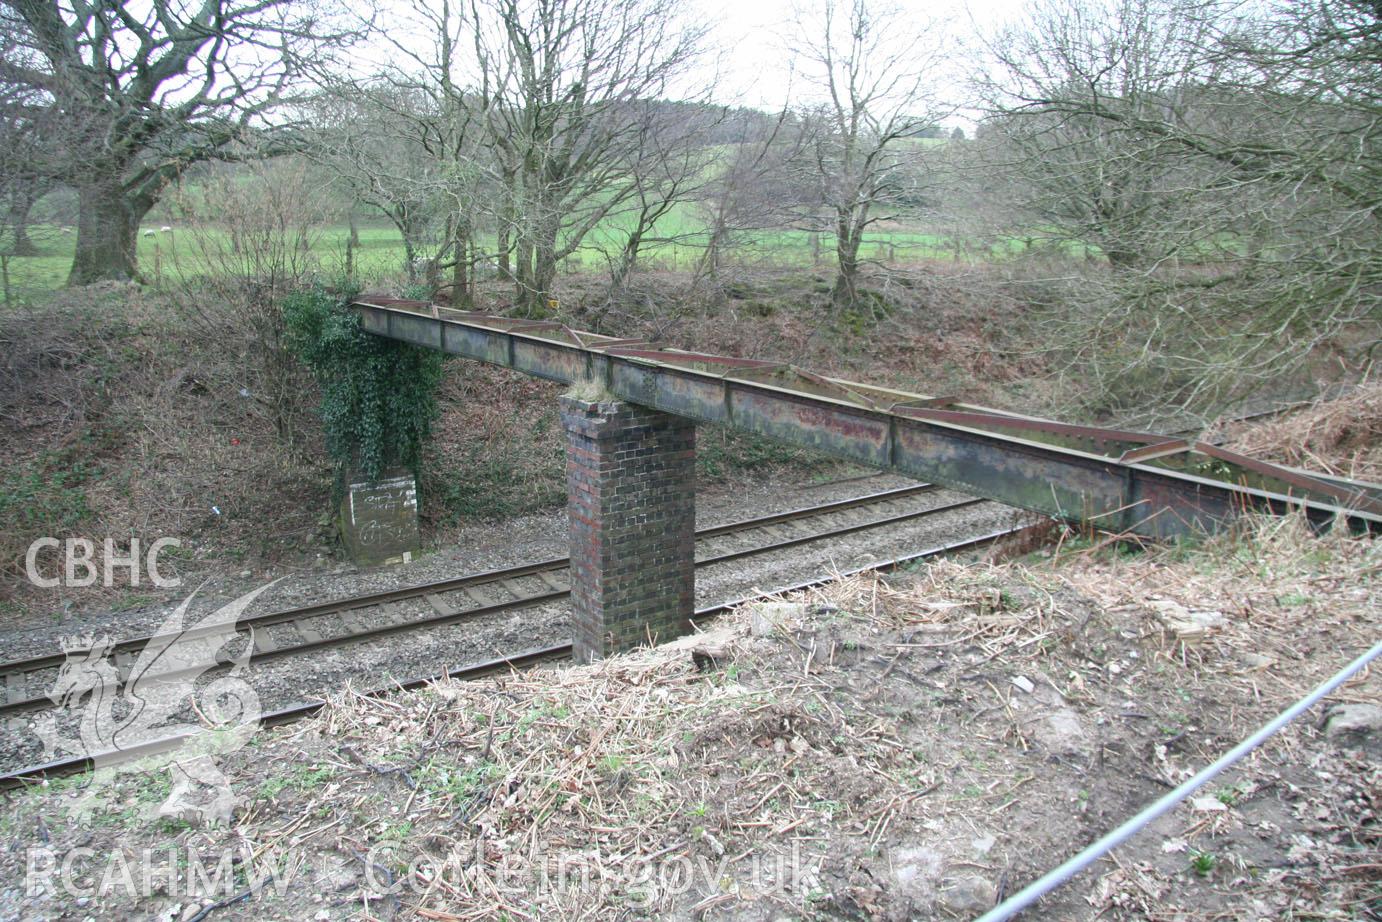 'Aqueduct across railway (looking south-southeast).' Digital colour photograph taken during site visit to land south of school lane, Penperlleni. Part of Archaeological Desk Based Assessment conducted by Iestyn Jones of Archaeology Wales, 2014.